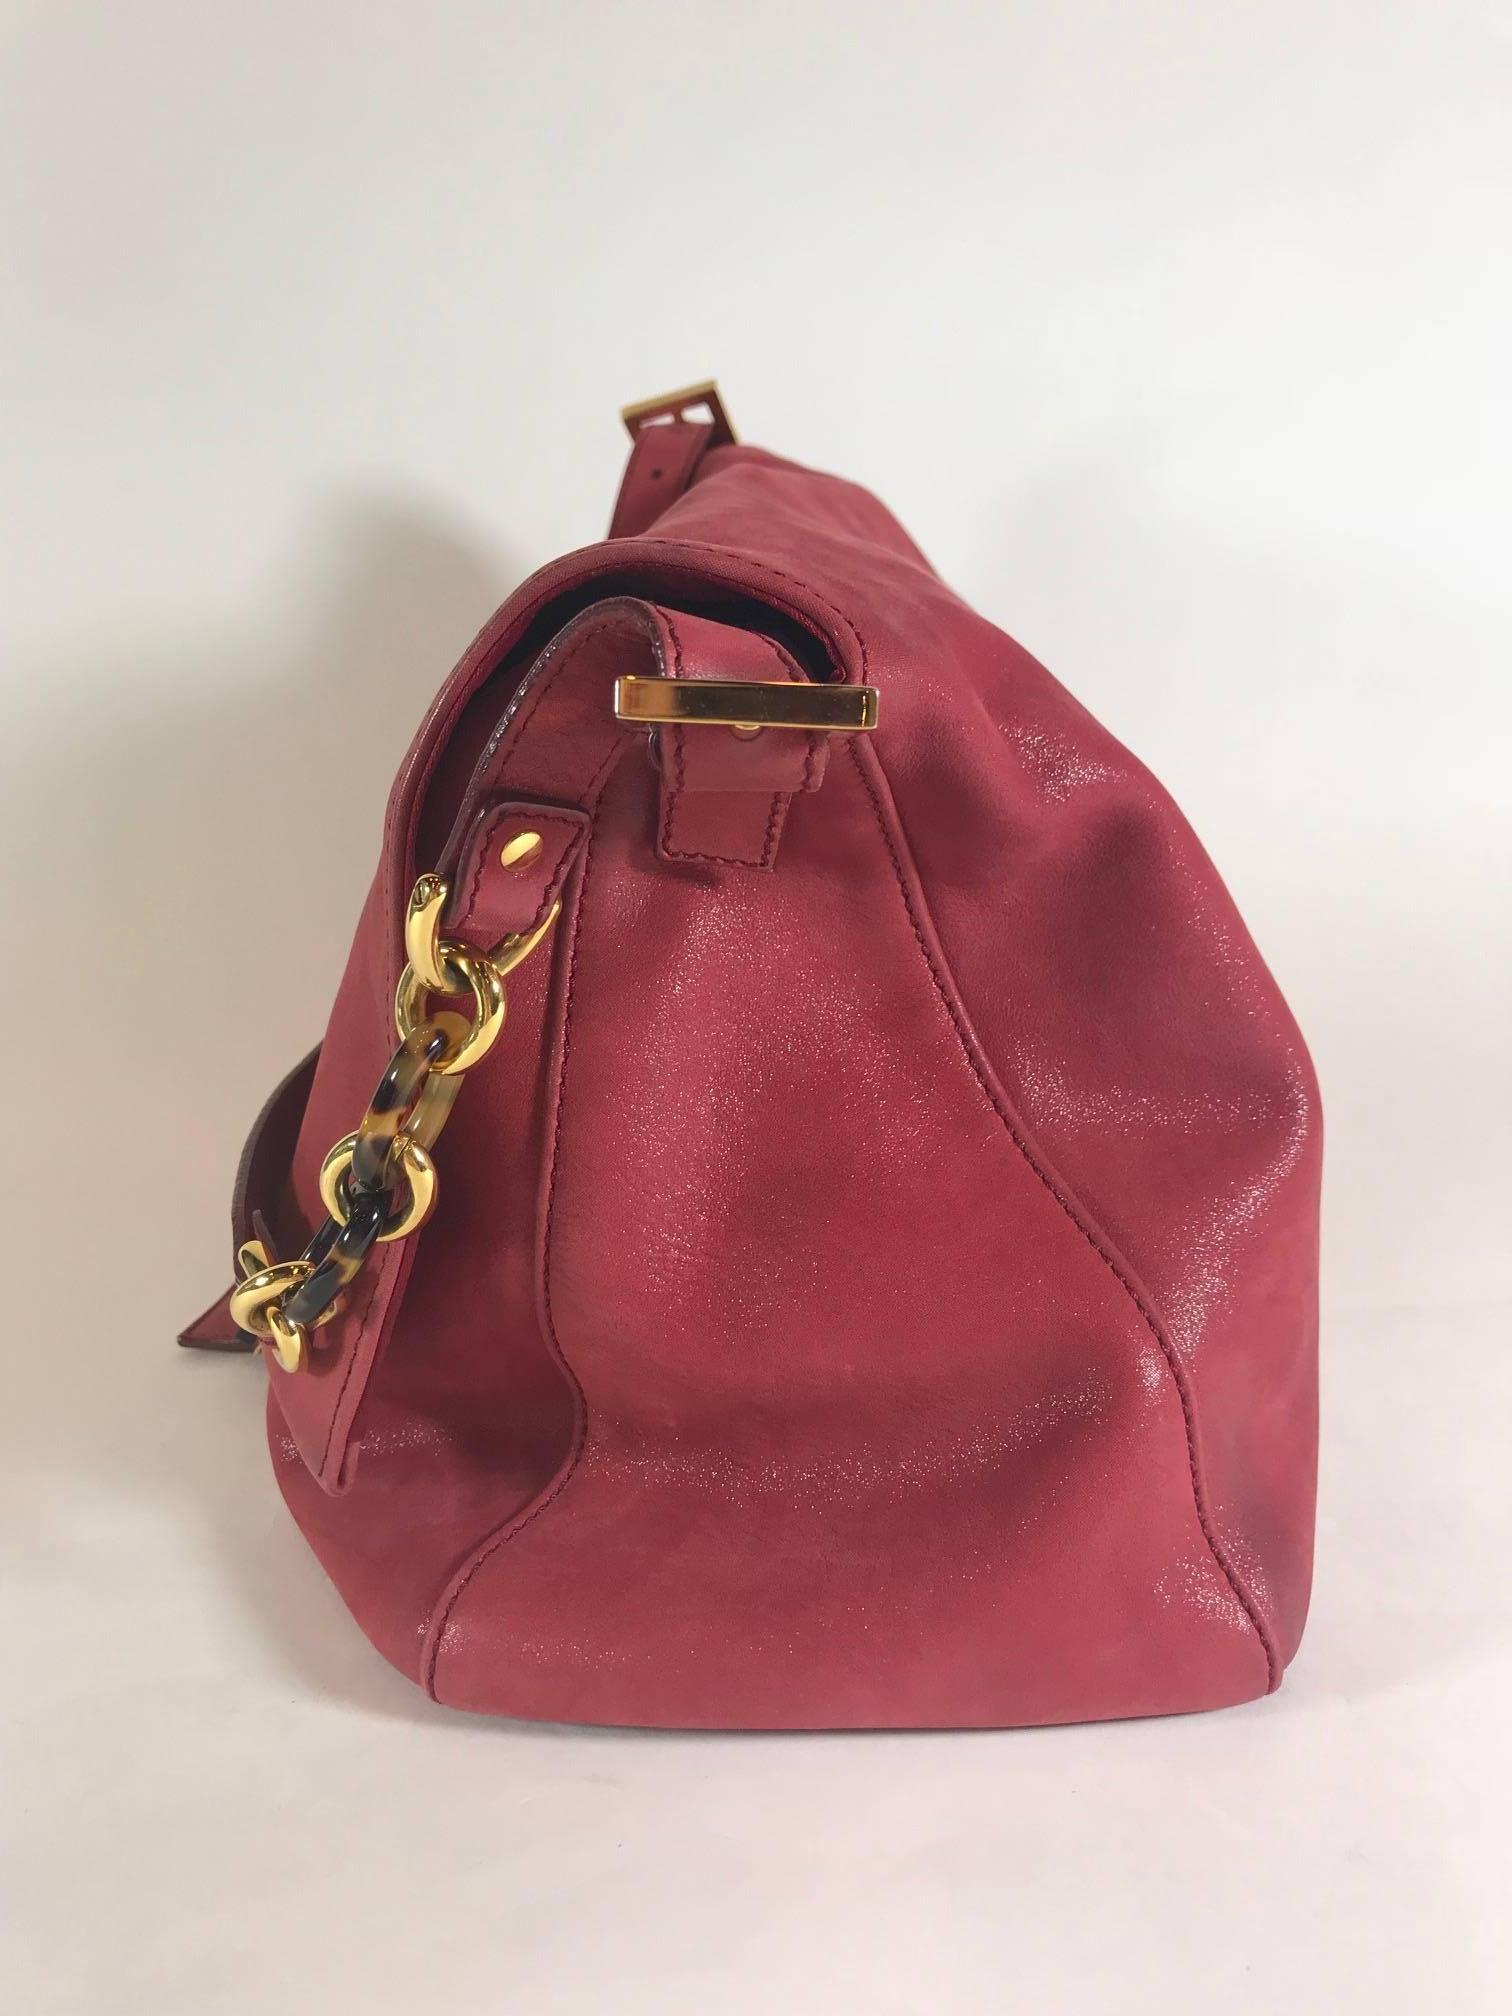 Raspberry shiny leather. Gold-tone hardware. Front flap and Ceramic 